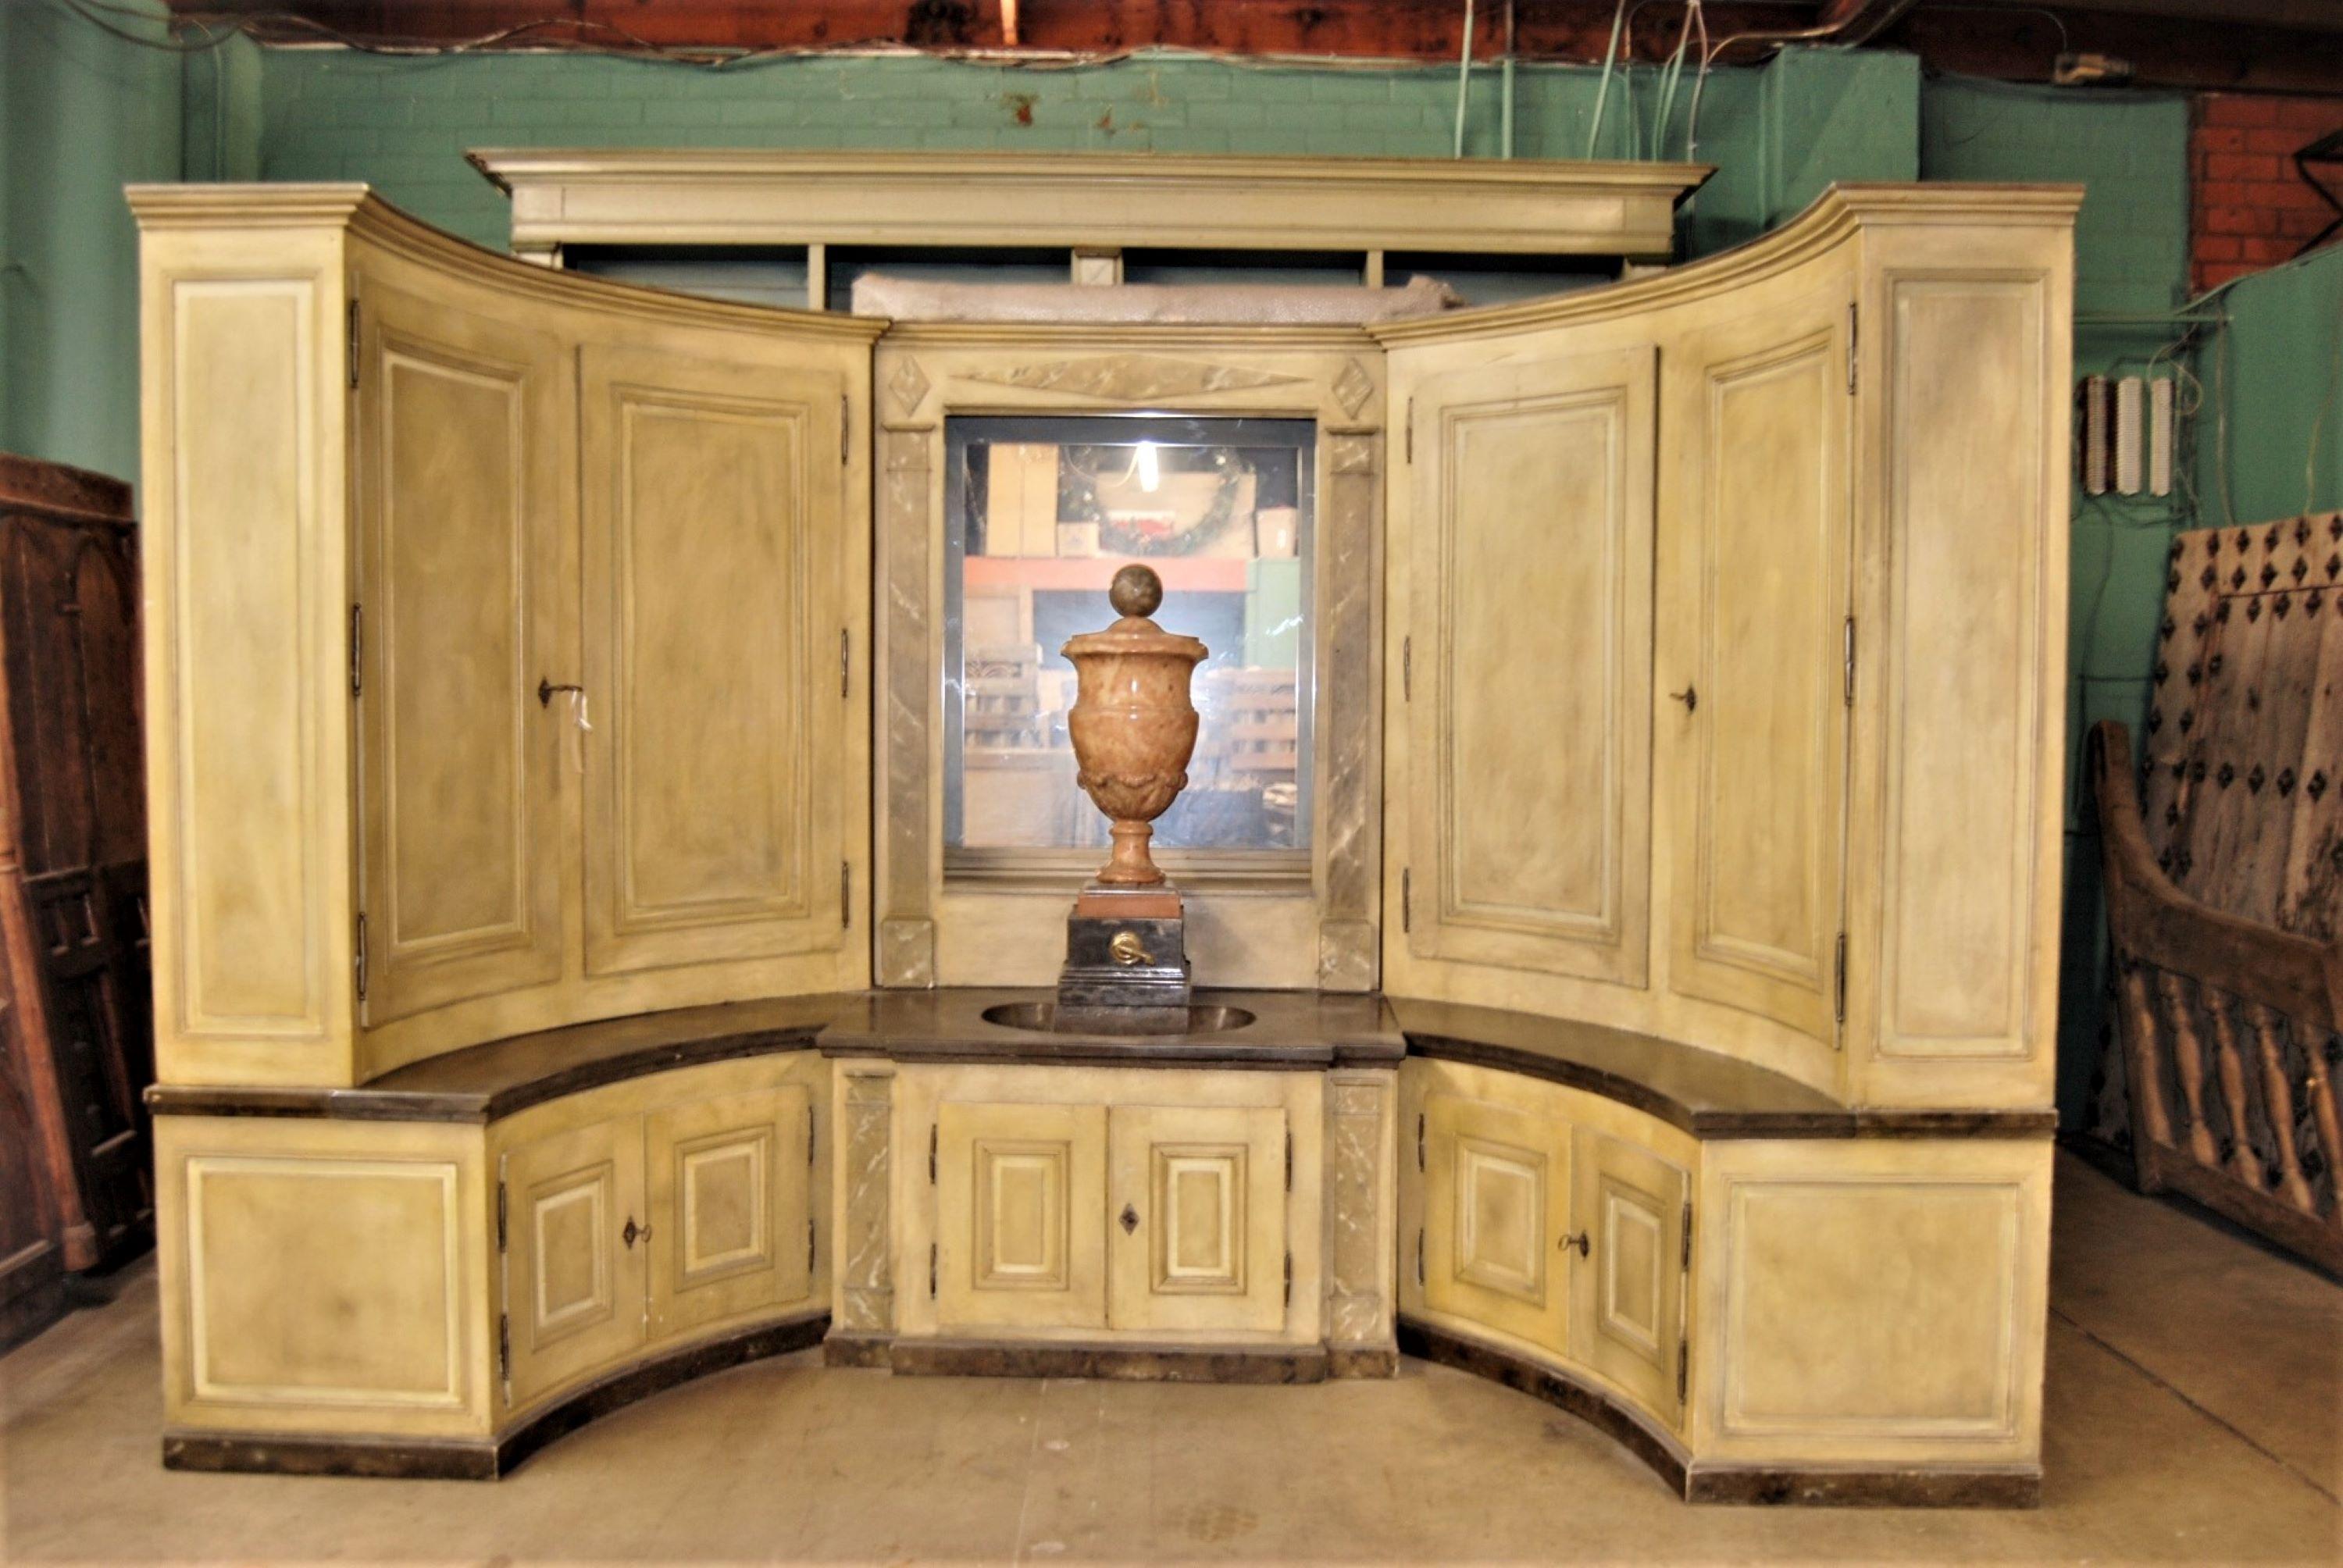 Empire Charles X Enfilade Boiserie buffet lavabo alcove fountain cabinet sink LA . Very important and large Enfilade De Boiserie buffet lavabo circa 1810 Empire Transition Charles X a great patron of the arts. Light colored woods, yellow or bleached